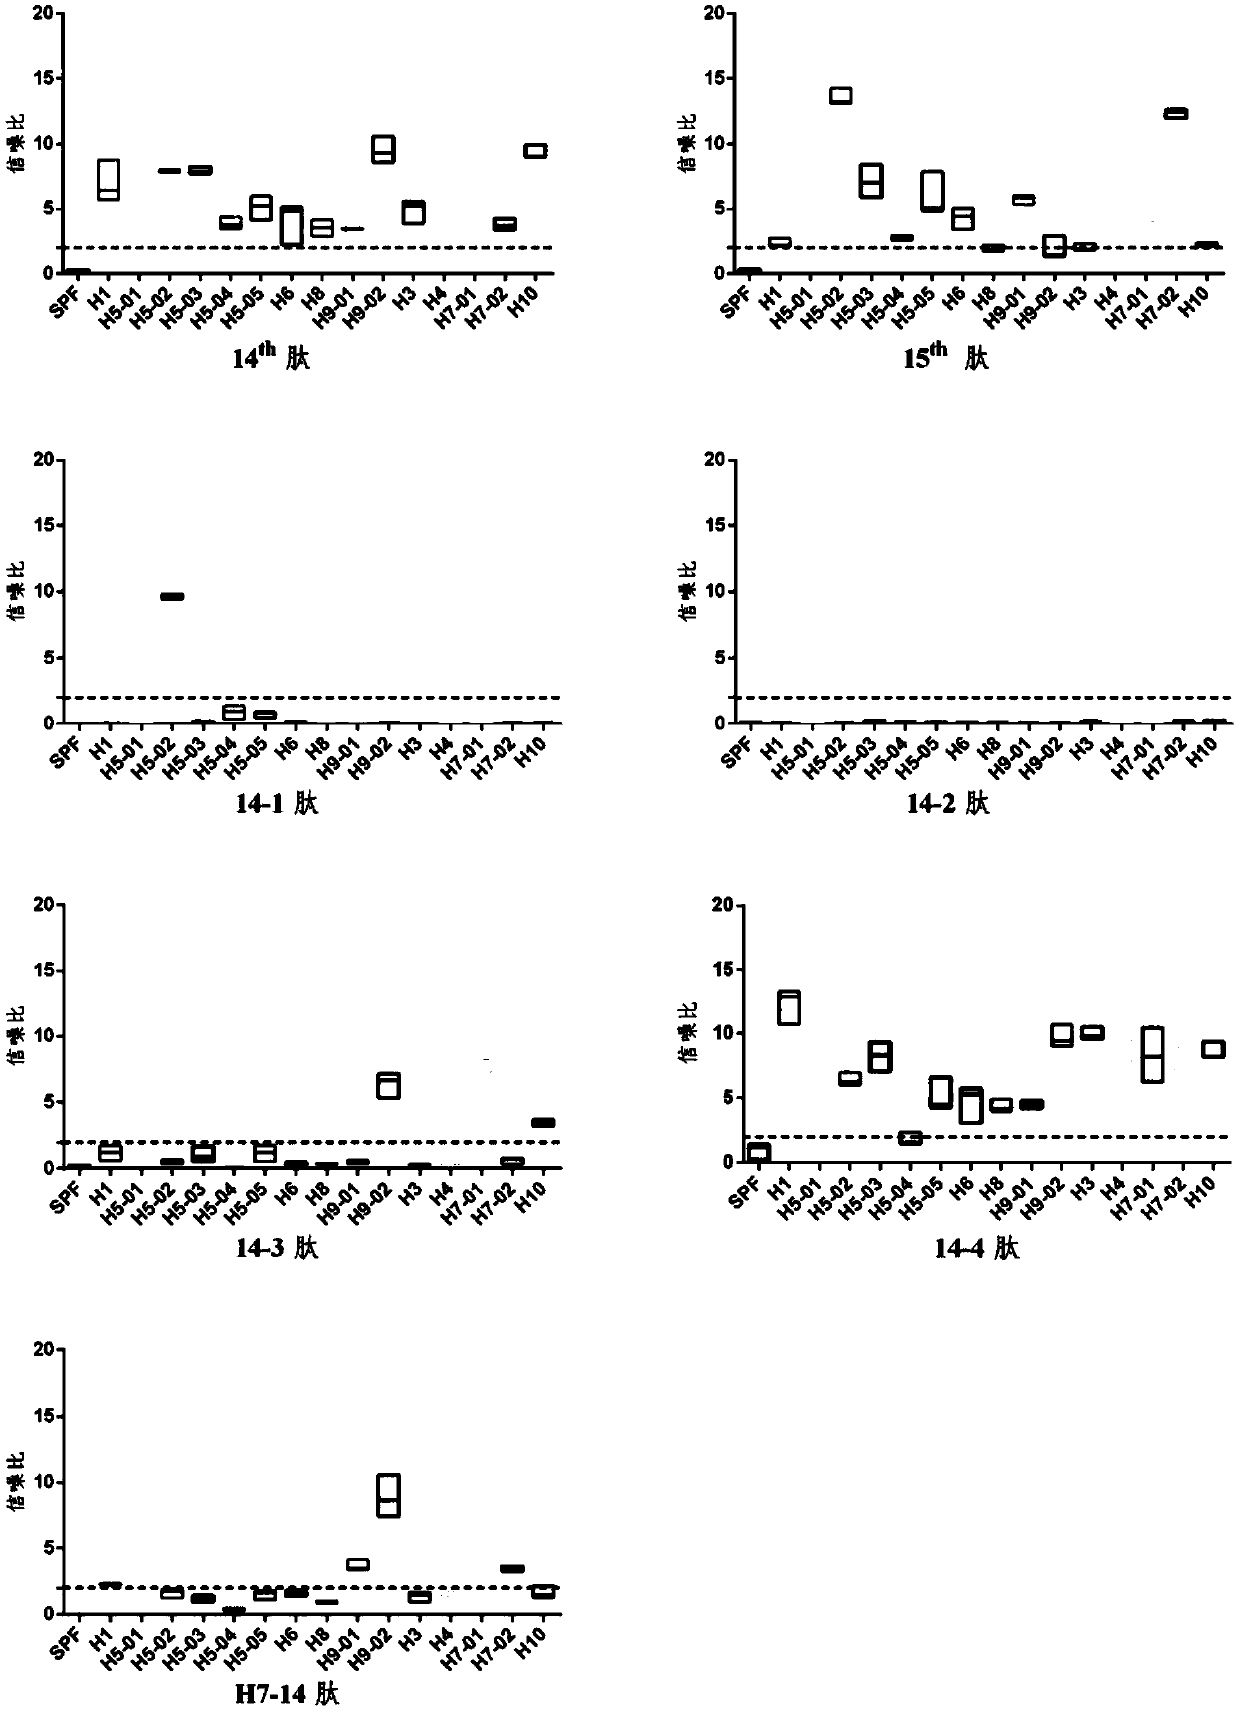 Common epitope, antibody, identification method and application of multiple subtype influenza virus HA2 proteins